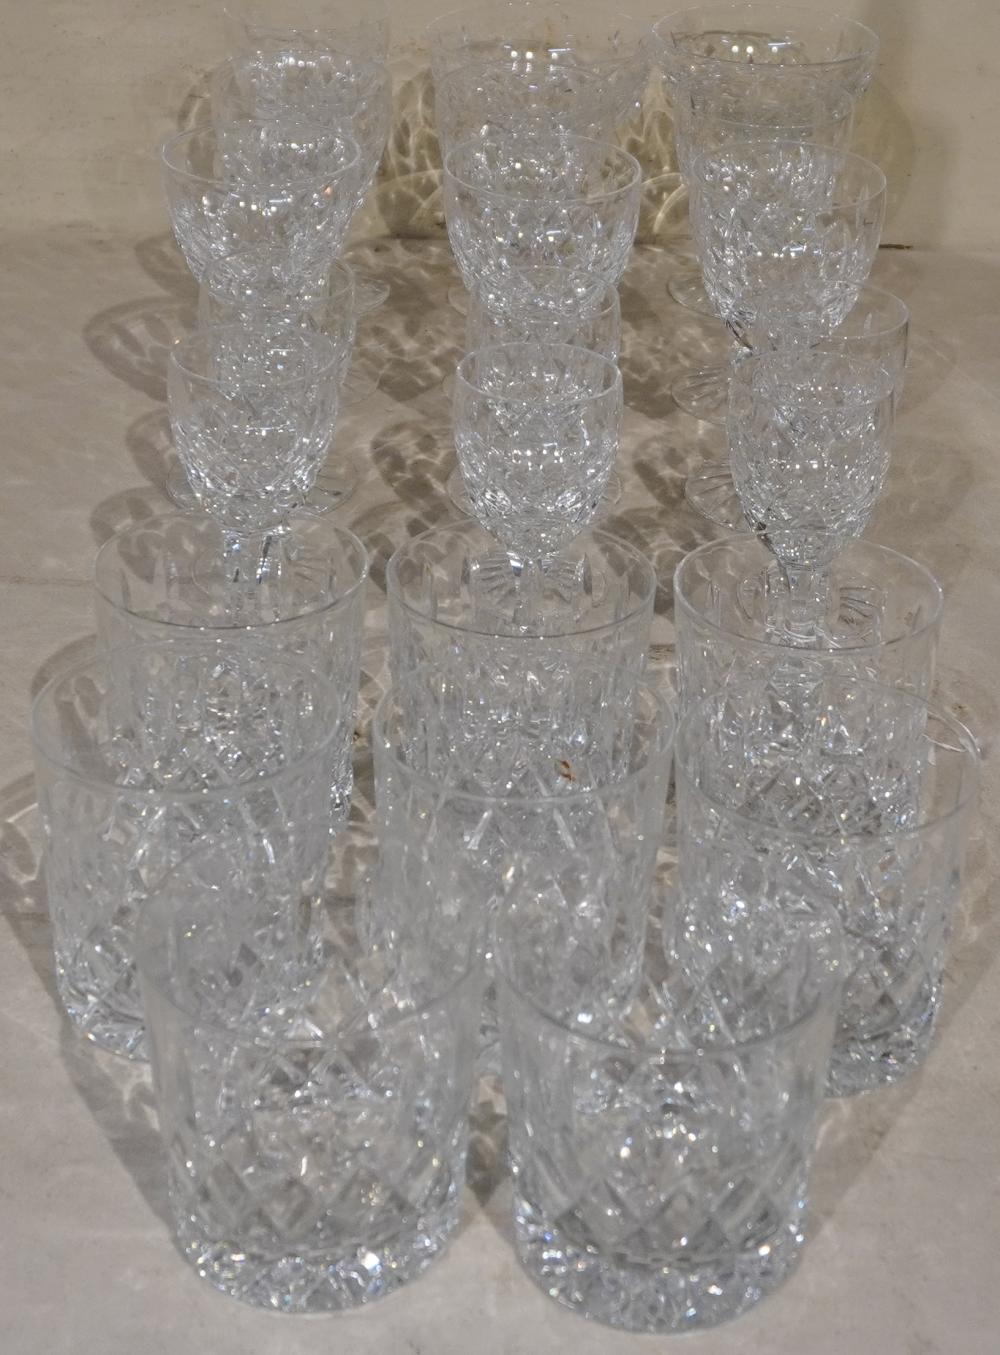 COLLECTION OF ROYAL BRIERLEY CRYSTALWARECollection 2e6736